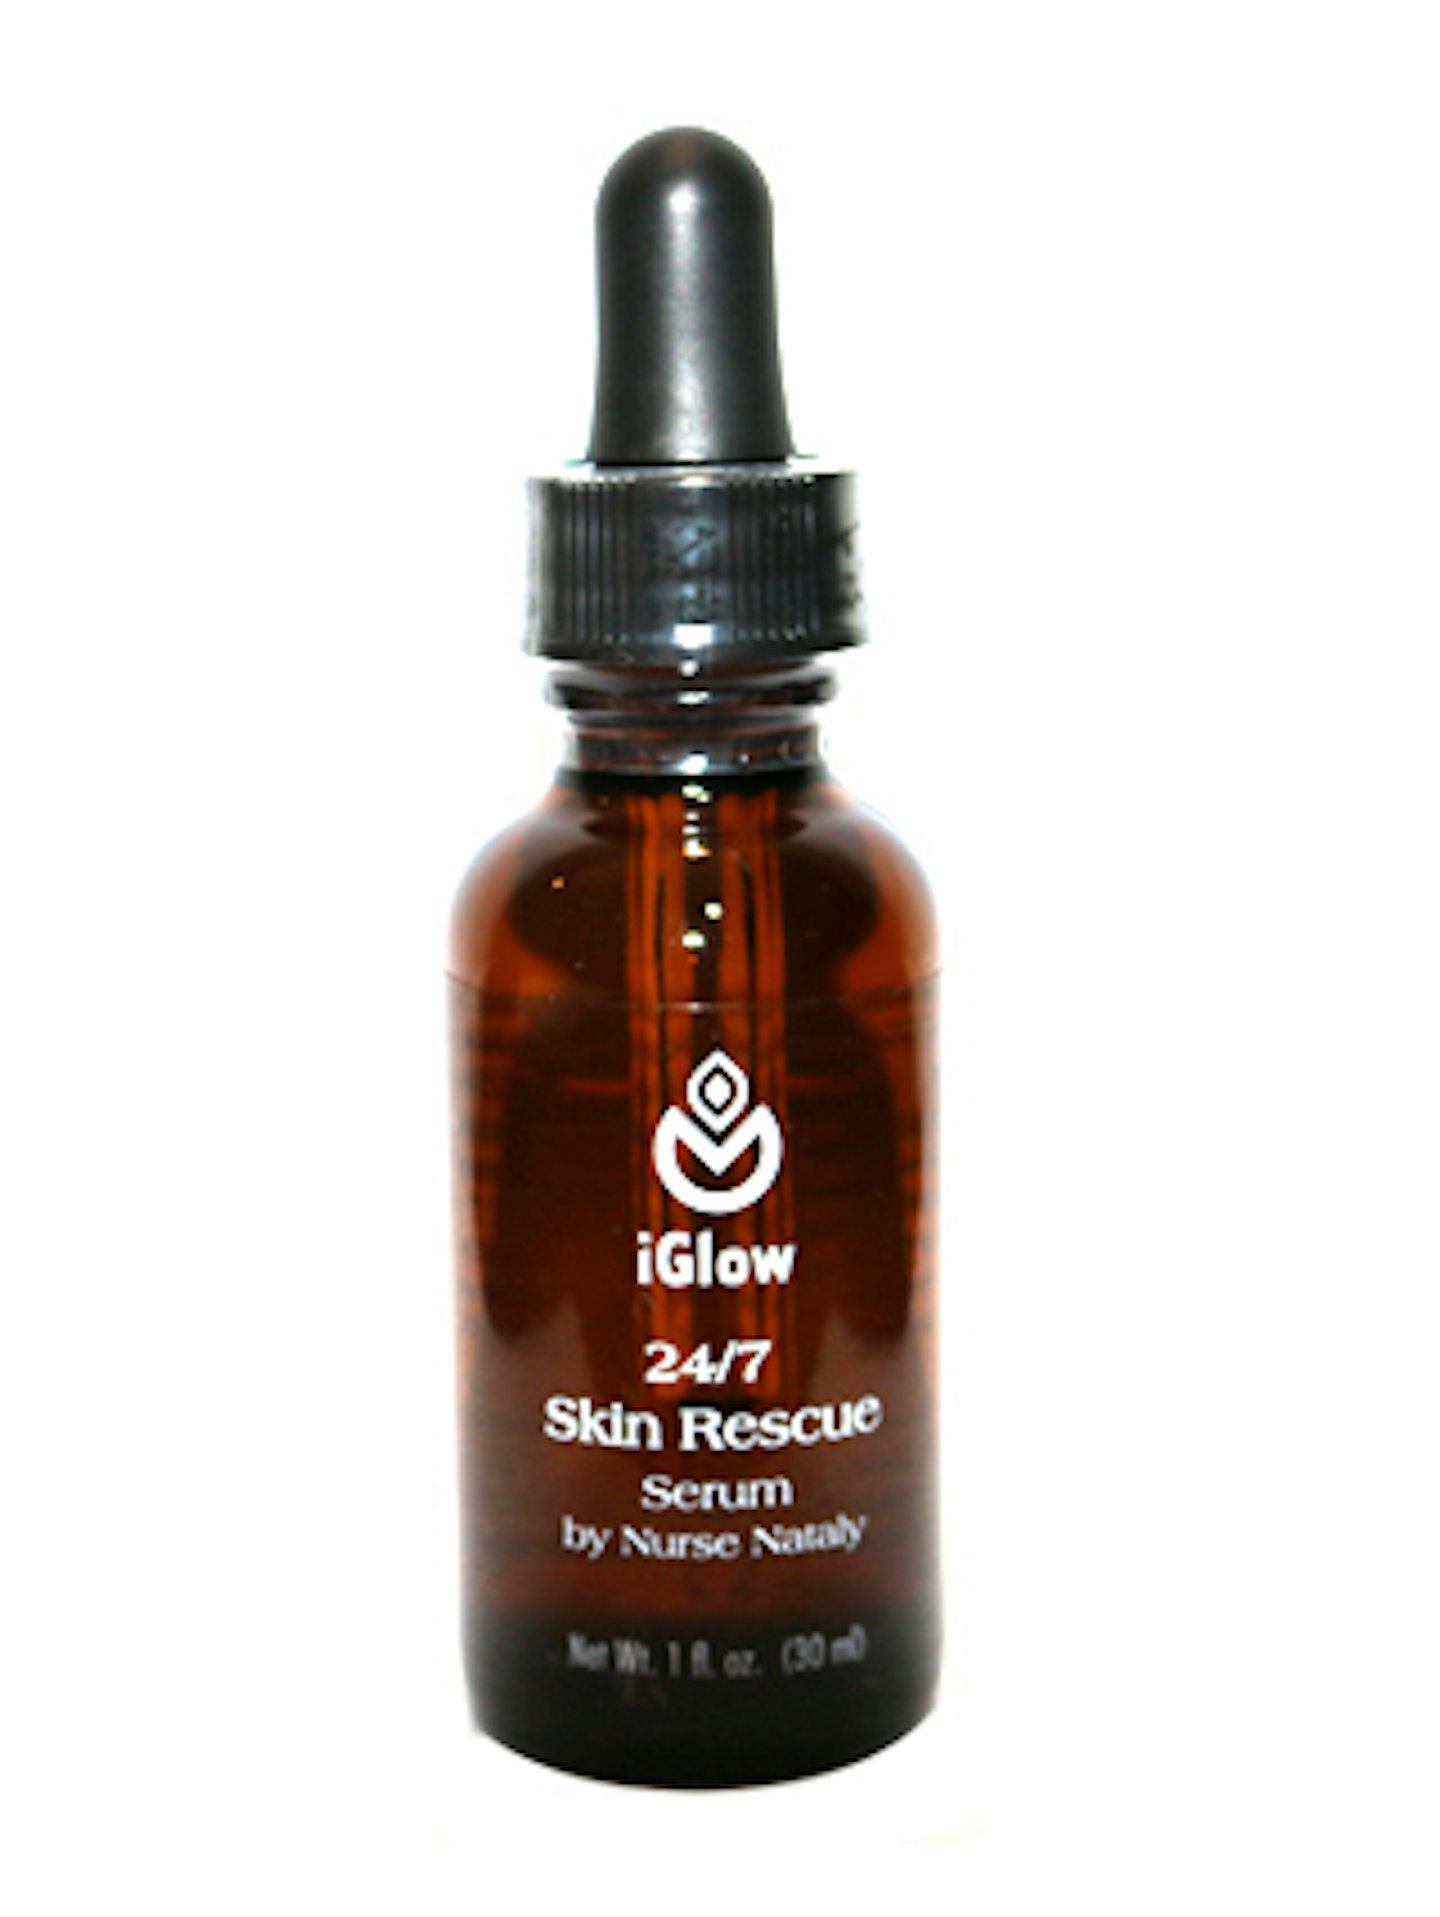 24/7 Skin Rescue is an excellent serum for the face